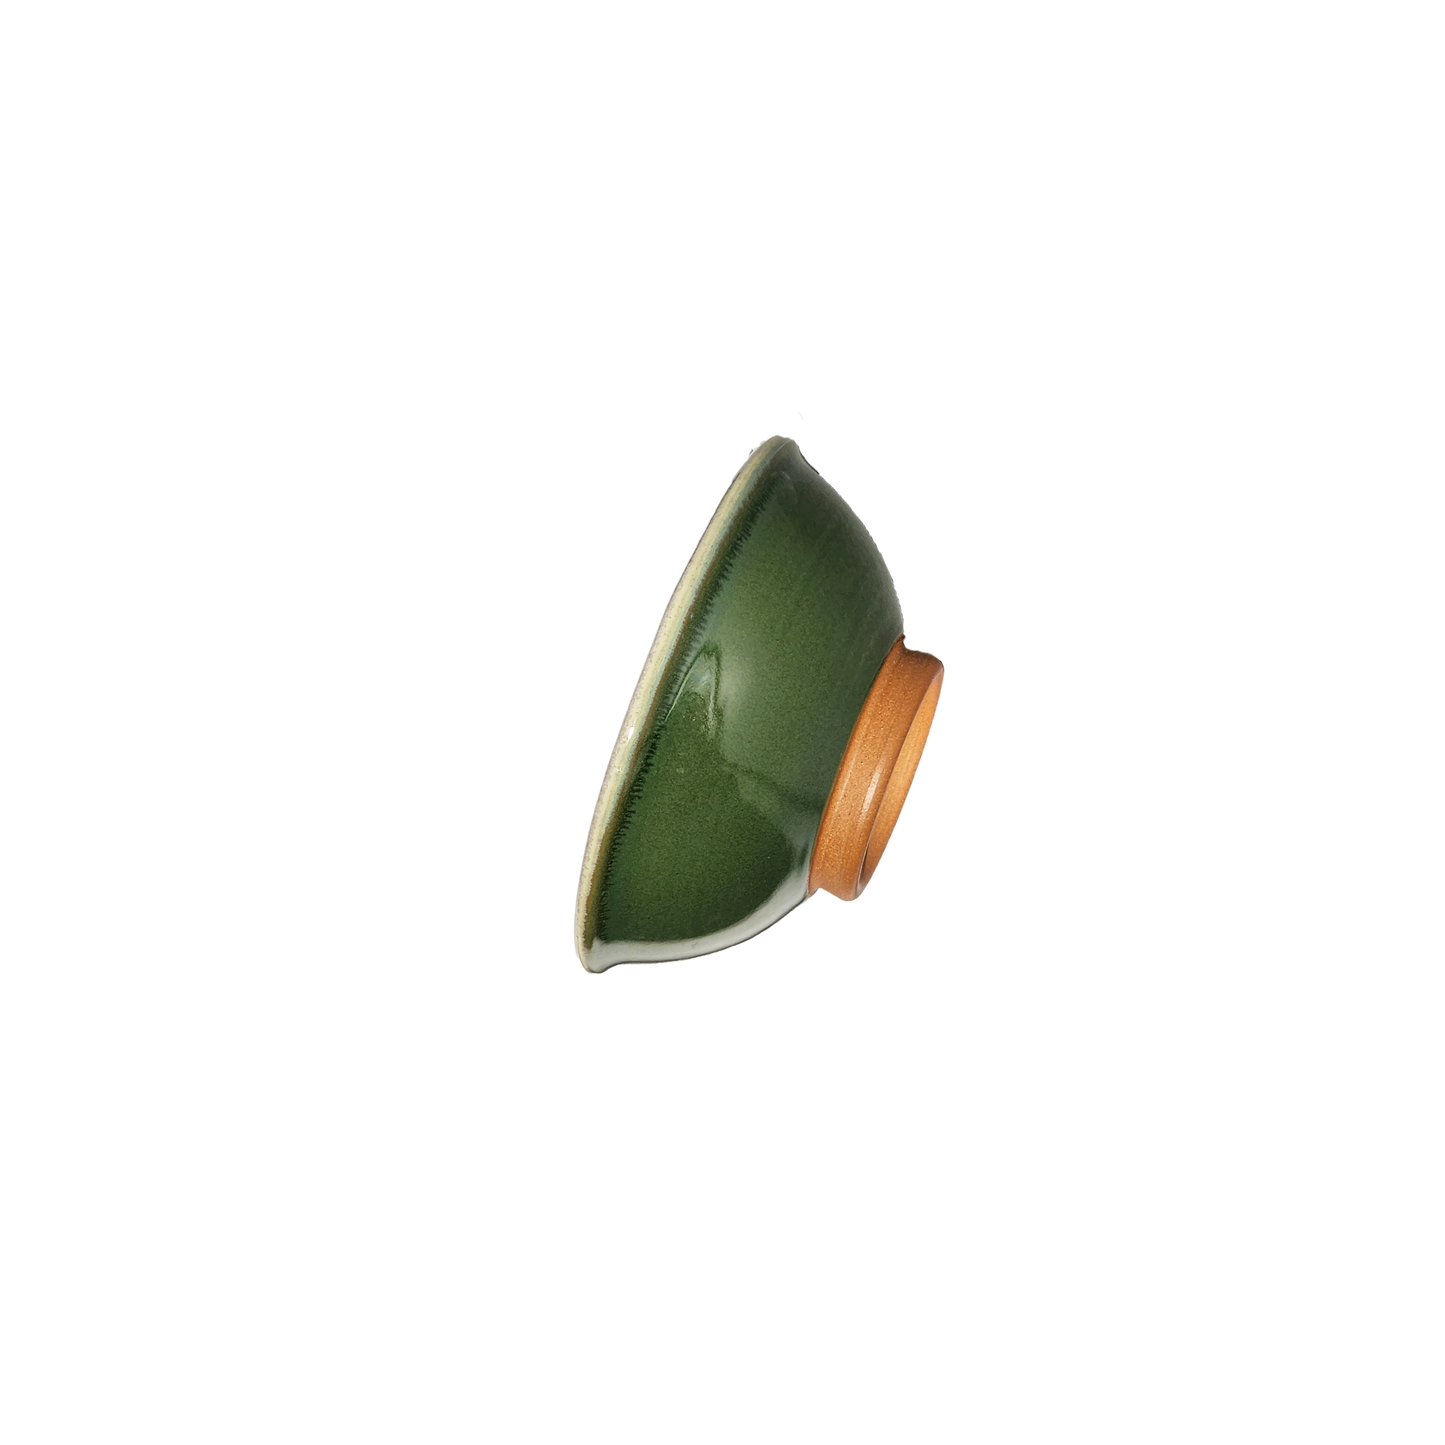 Image:A ceramic bowl in deep dark green, evoking the tranquility of lush forests. Sized at 1 cup, it's perfect for serving small portions of snacks or sauces.